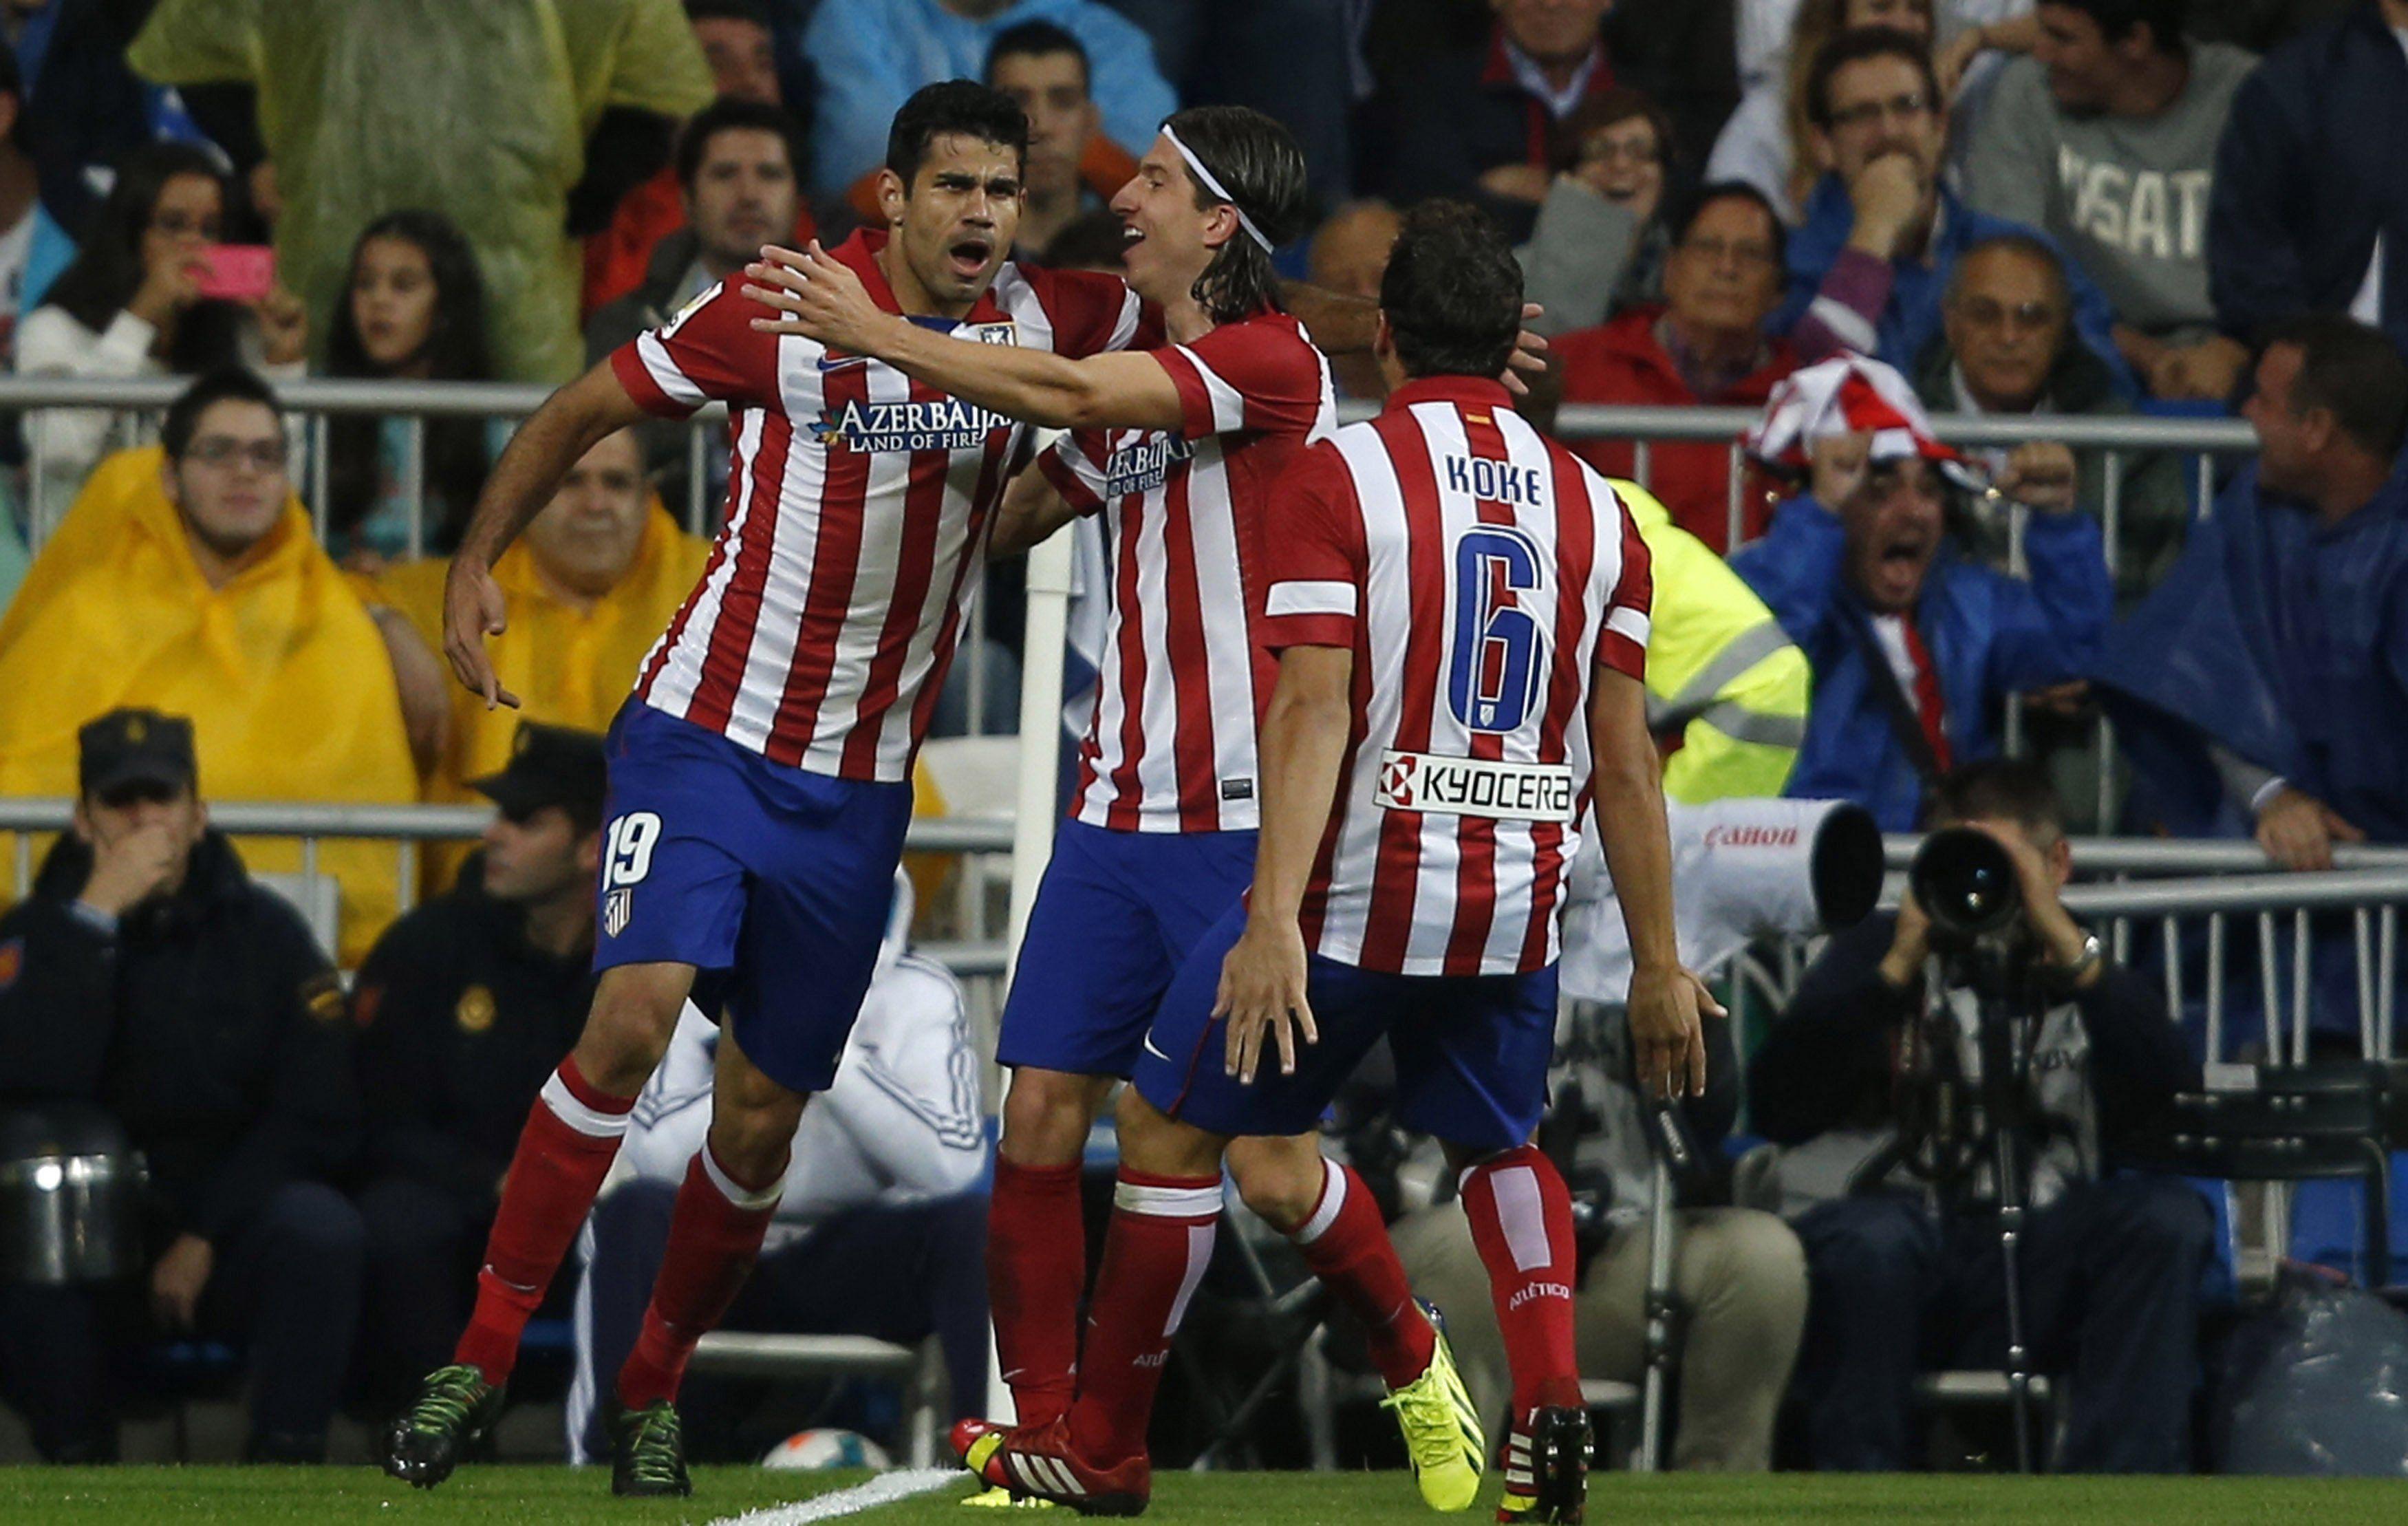 Diego Costa and Koke will stay at Atletico Madrid: Club sporting